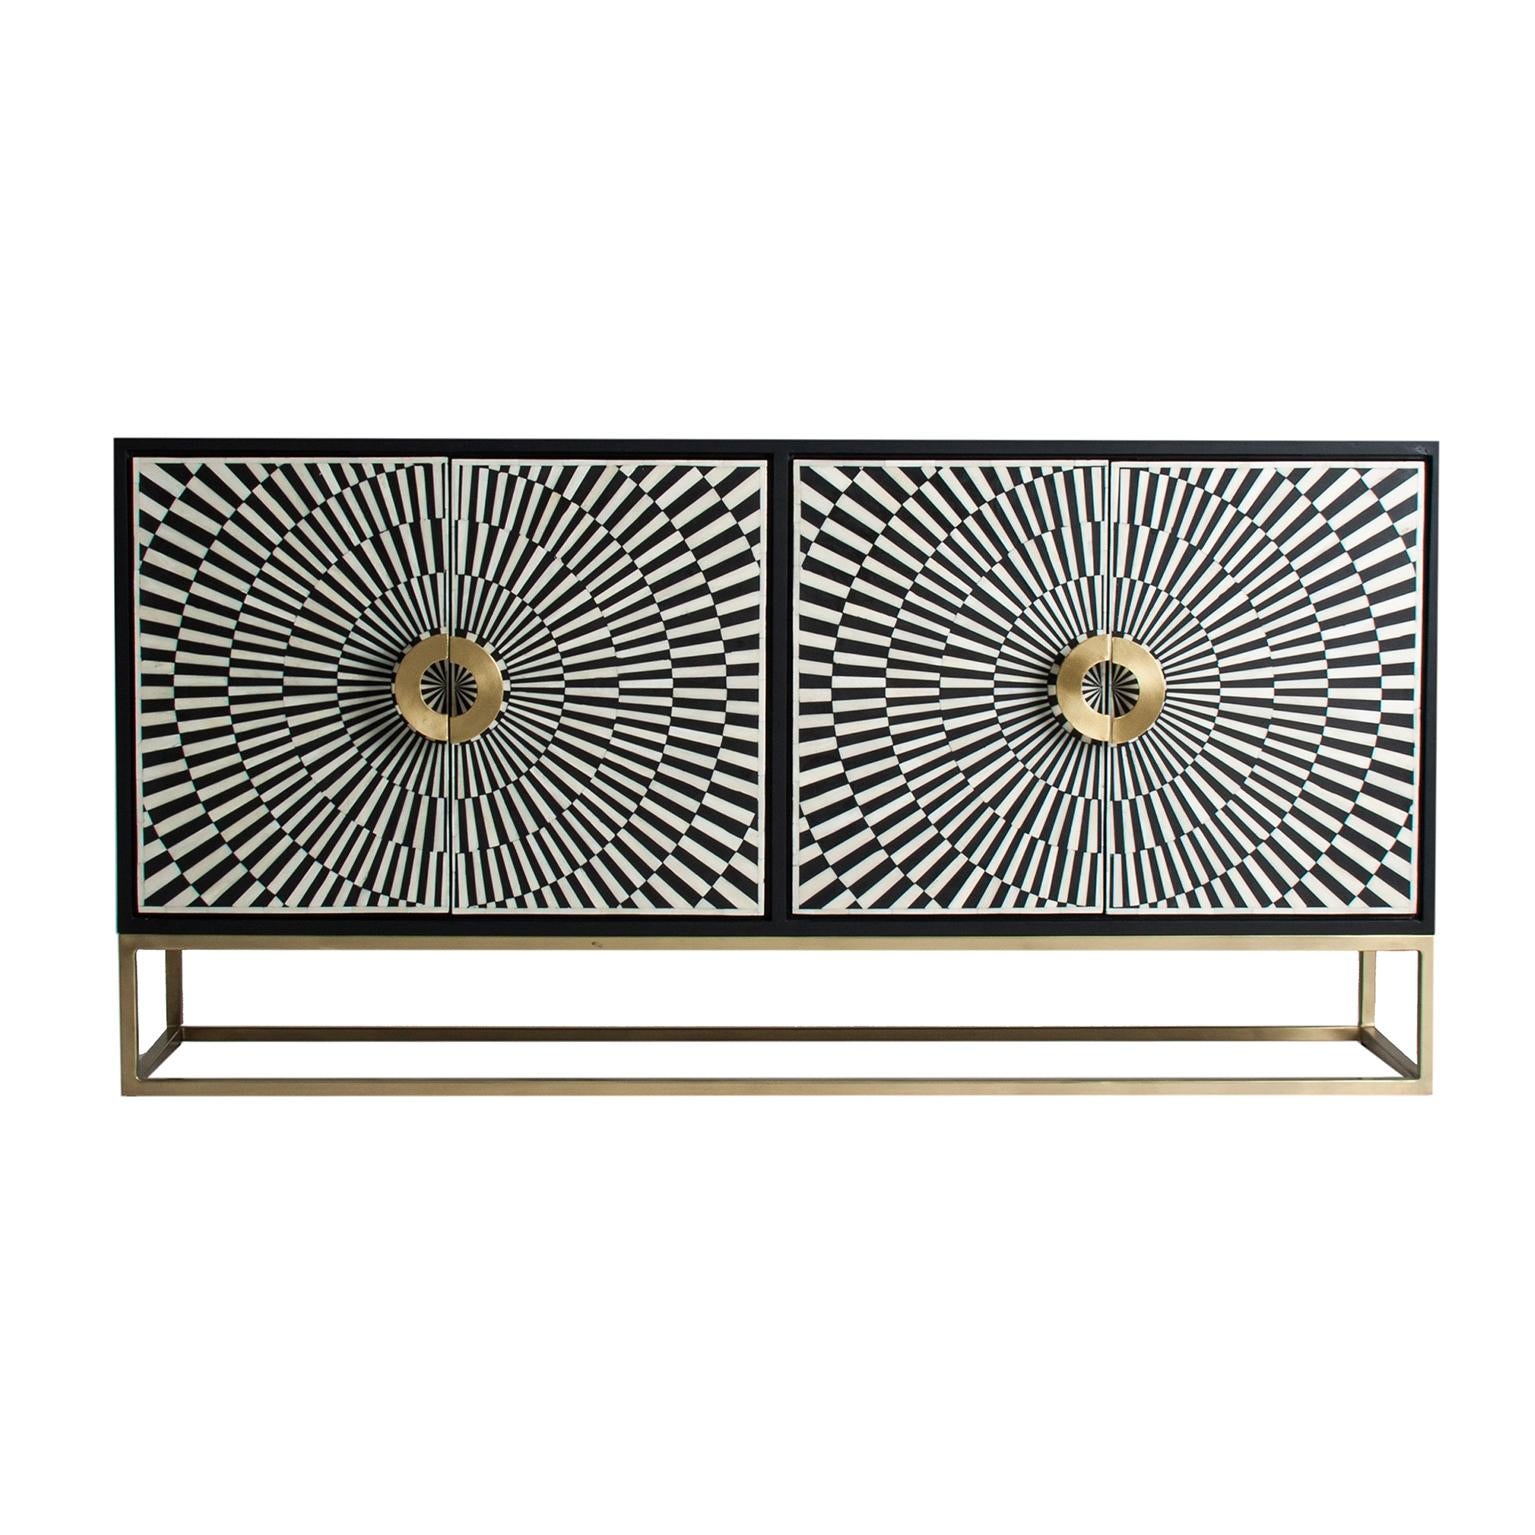 Wooden and metal Italian Design and Postmodern Style sideboard with sleek design, gold patina feet and subtle work of the graphic doors.